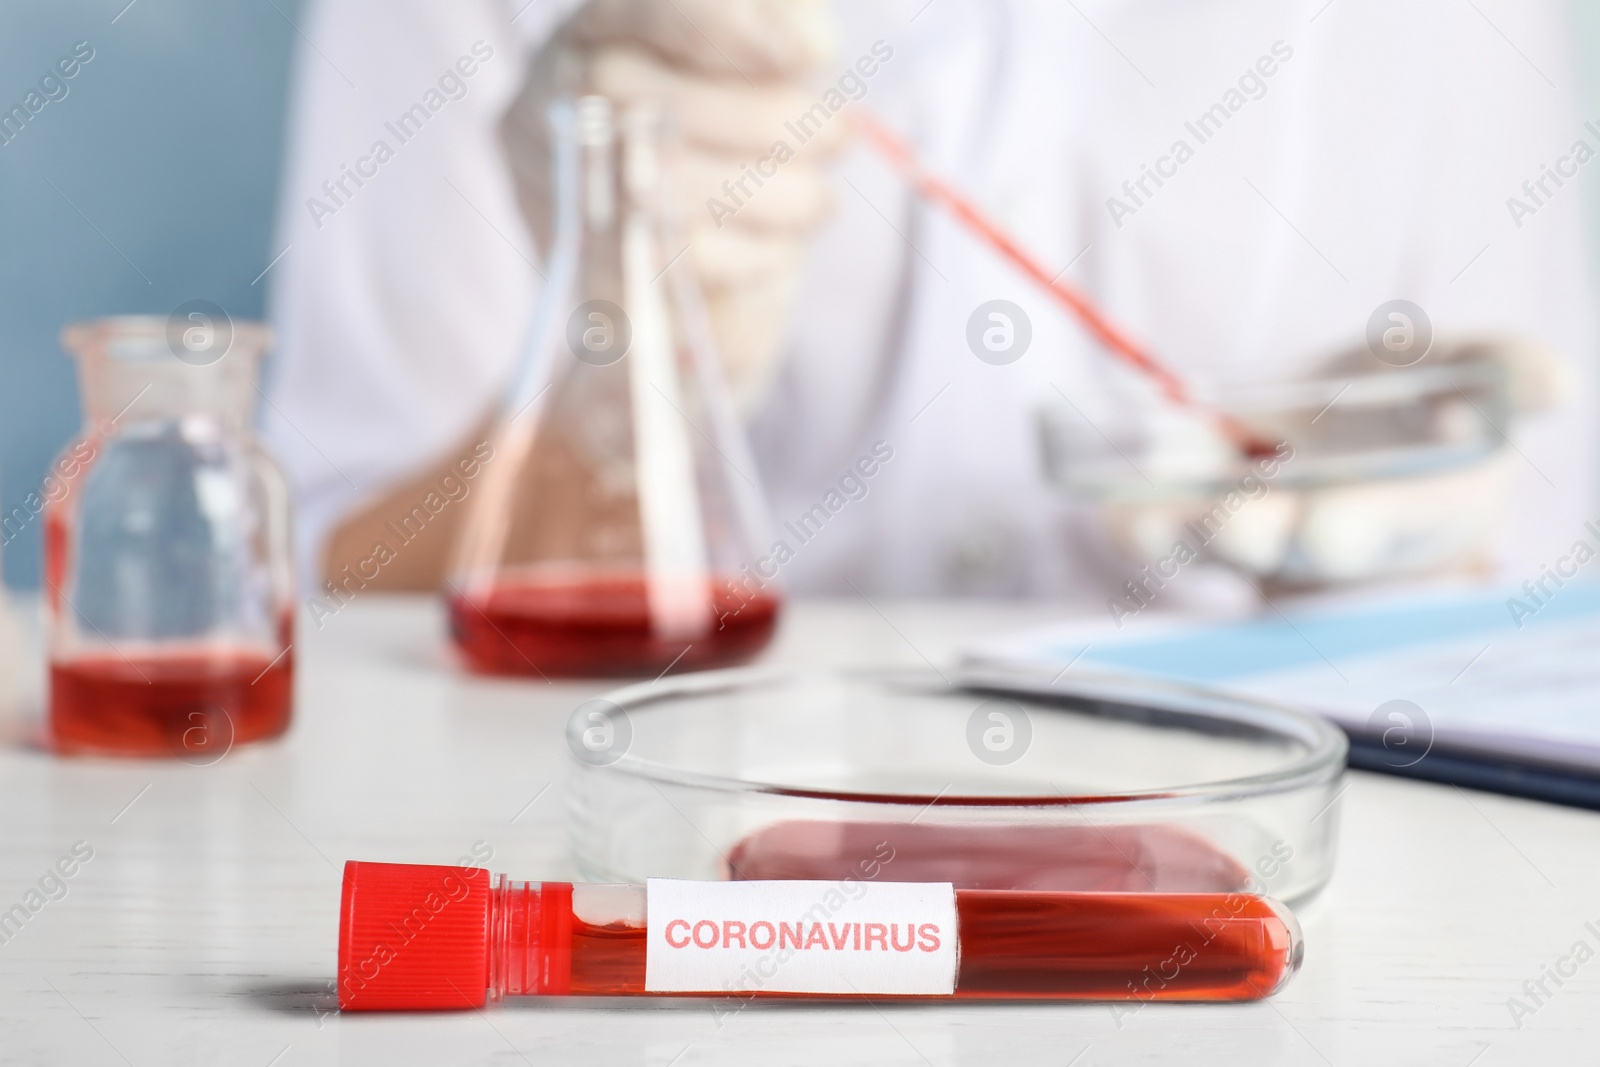 Photo of Test tube with blood sample and label CORONA VIRUS and Petri dish on table in laboratory, closeup